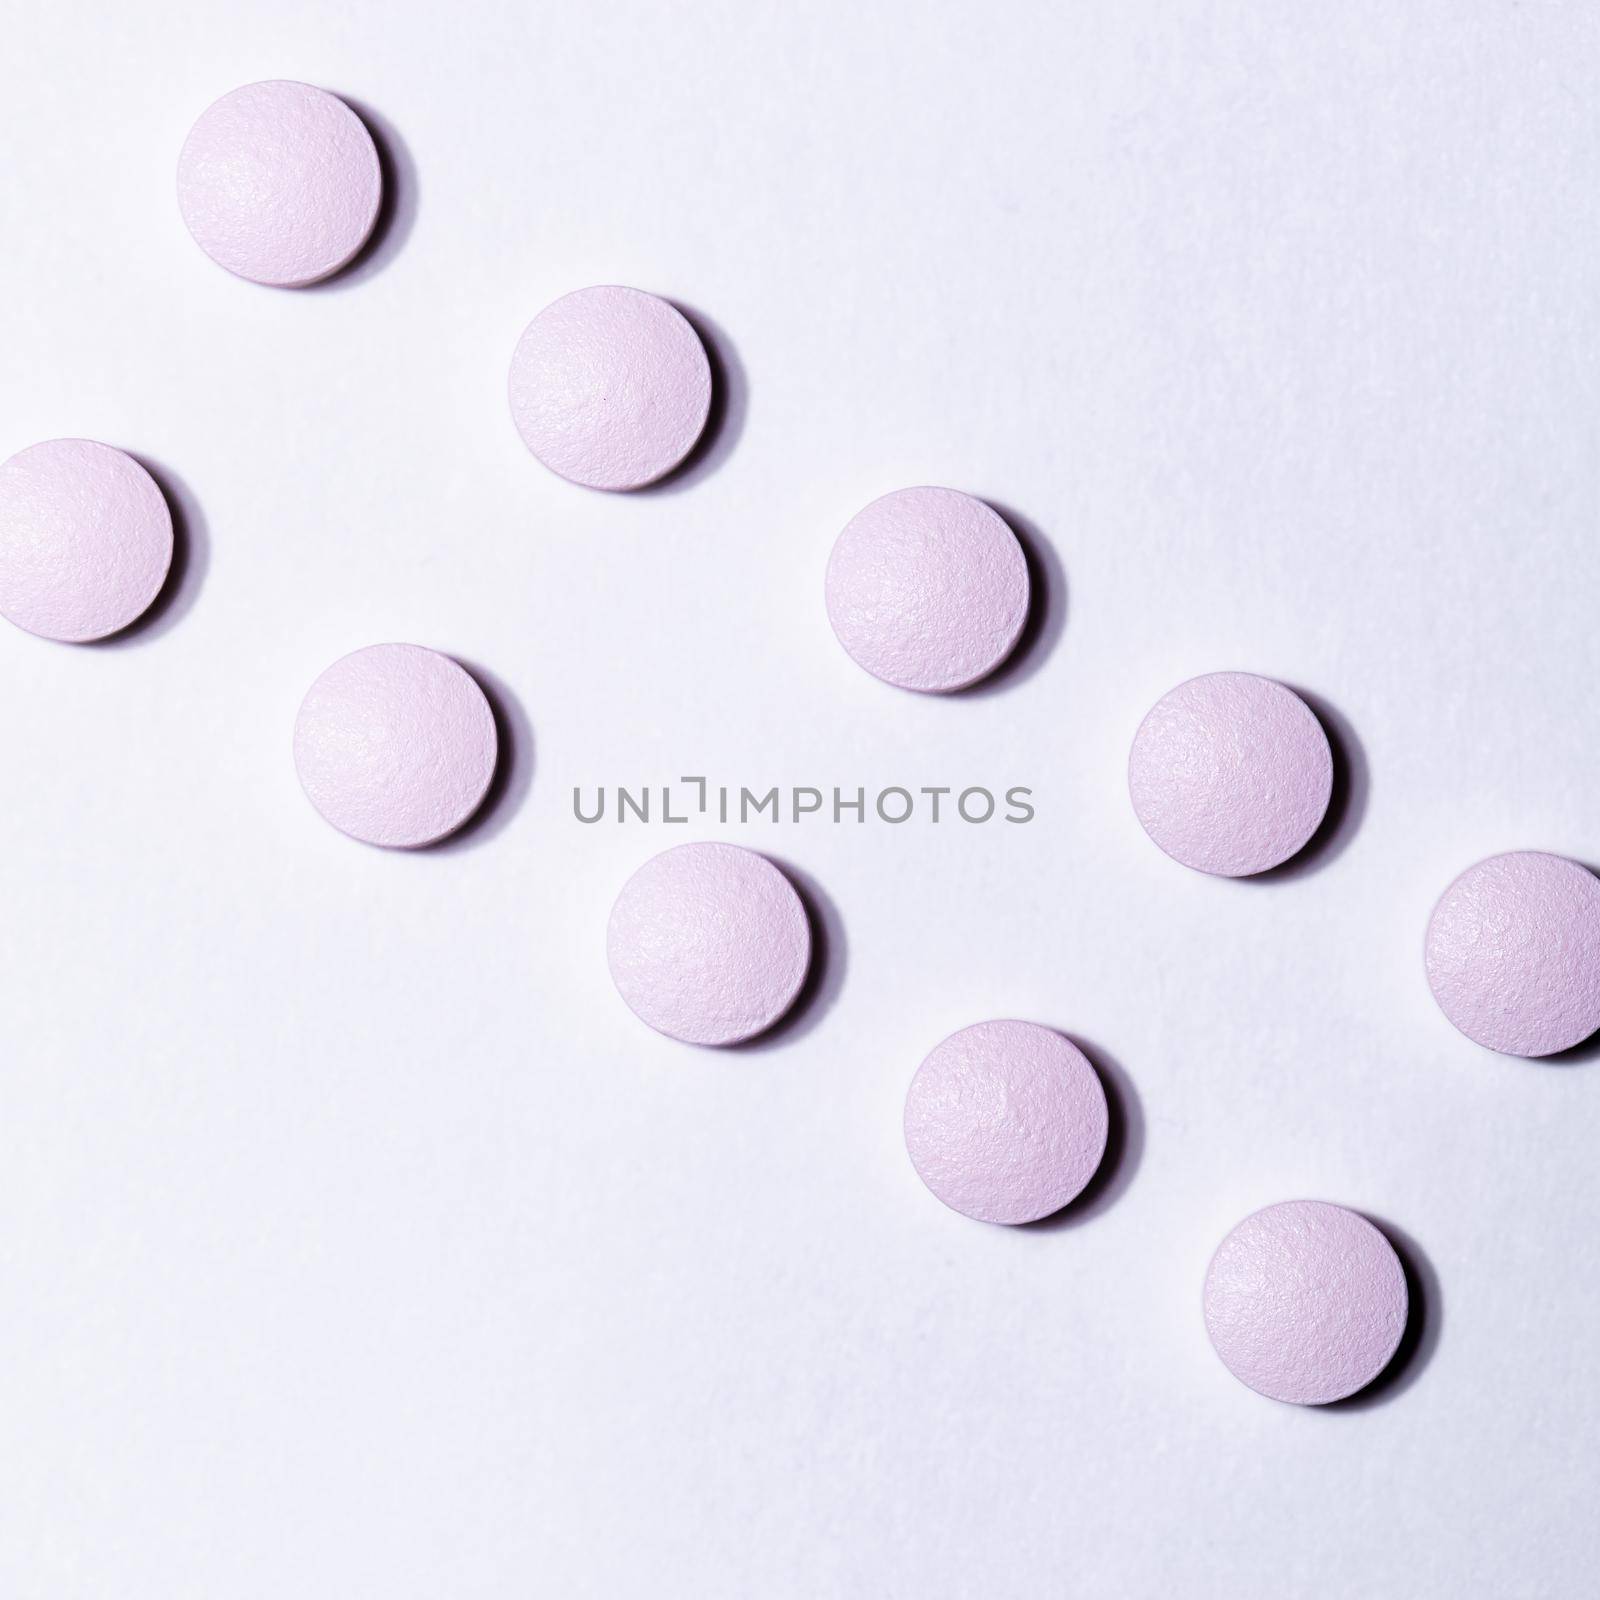 close up. packaging of tablets on a light background. photo with a copy-space.